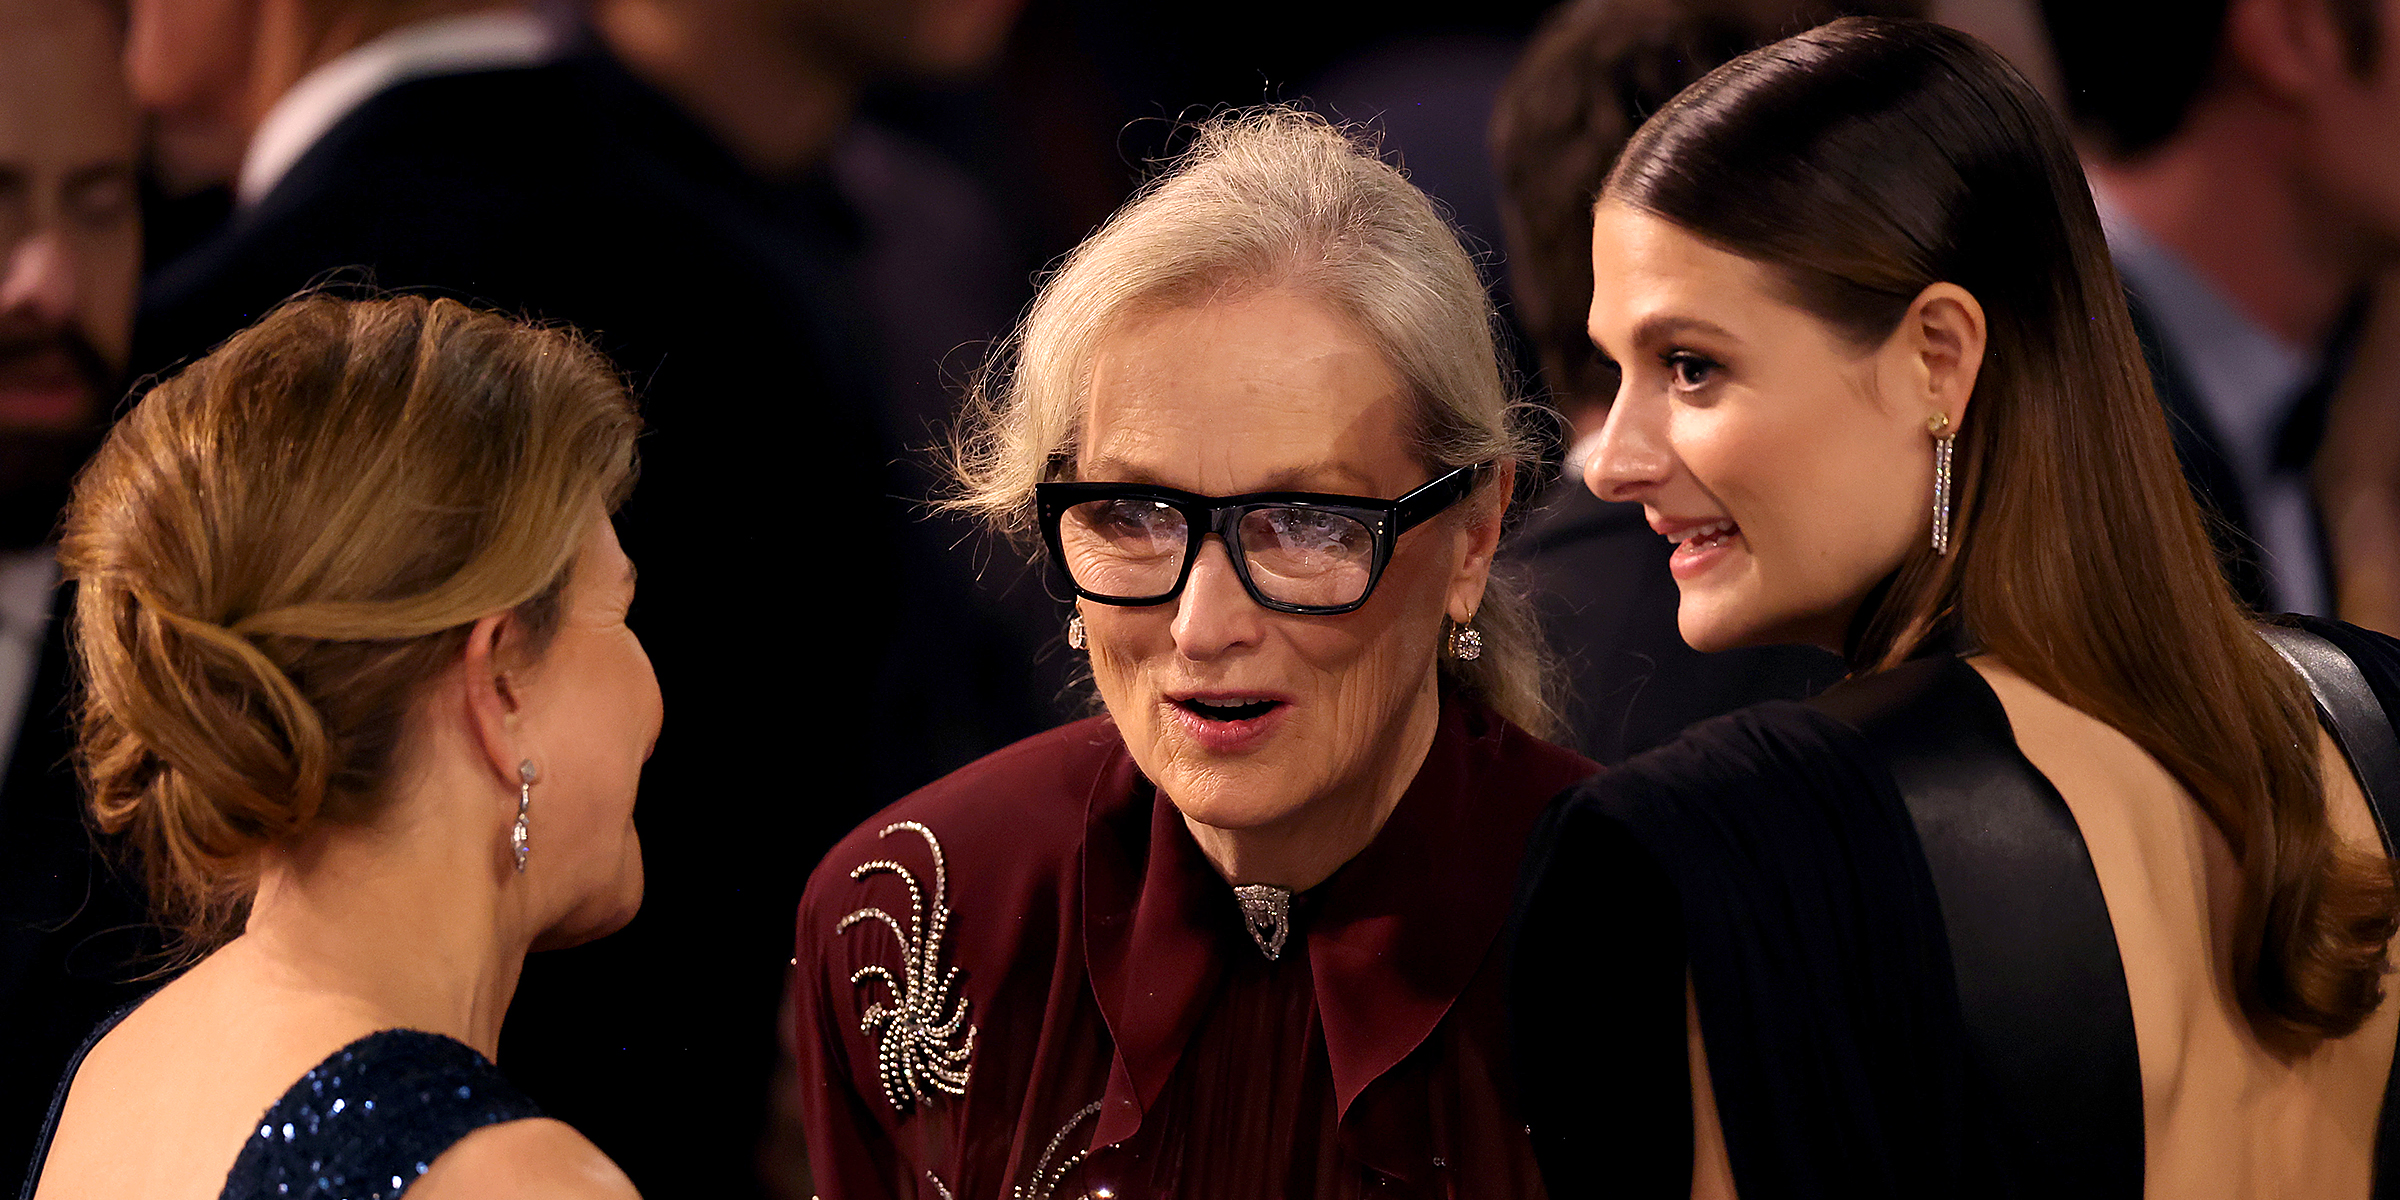 Meryl Streep and Louisa Jacobson | Source: Getty Images